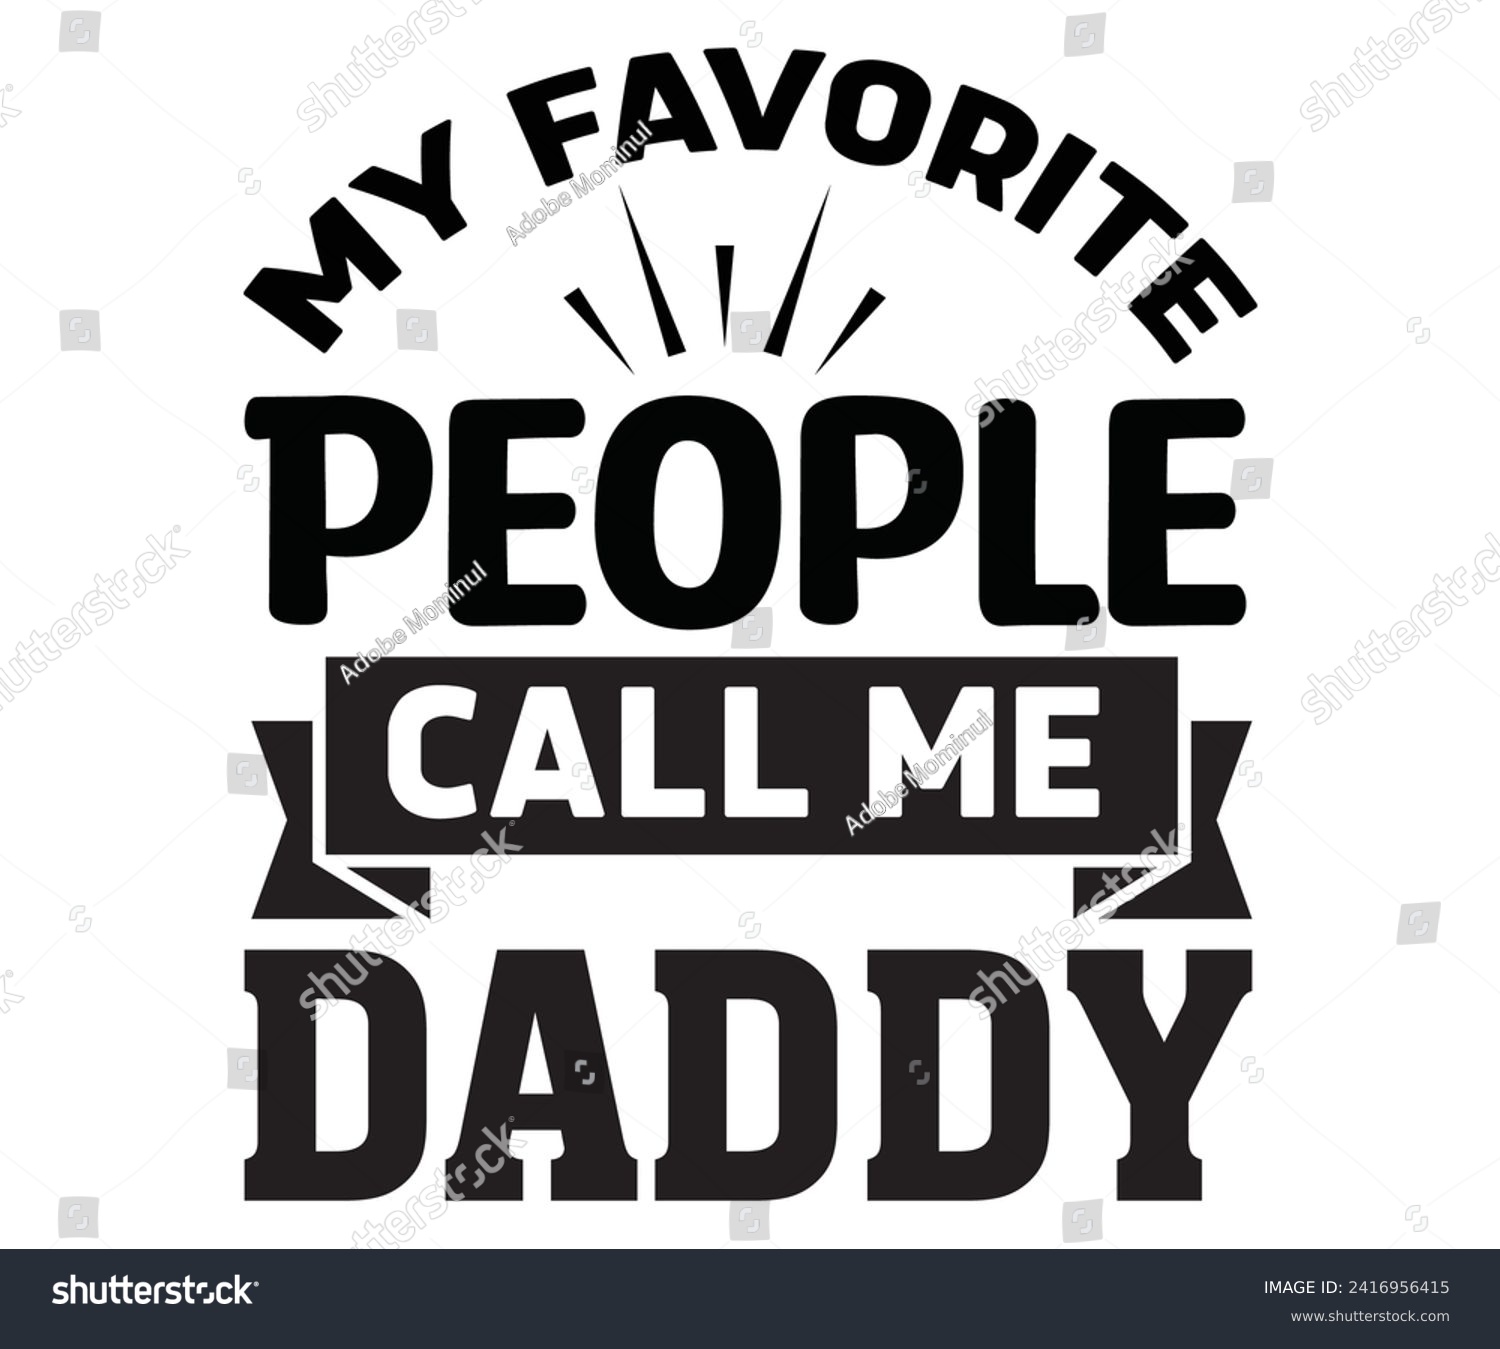 SVG of My Favorite People Call Me Daddy Svg,Father's Day Svg,Papa svg,Grandpa Svg,Father's Day Saying Qoutes,Dad Svg,Funny Father, Gift For Dad Svg,Daddy Svg,Family Svg,T shirt Design,Svg Cut File,Typography svg